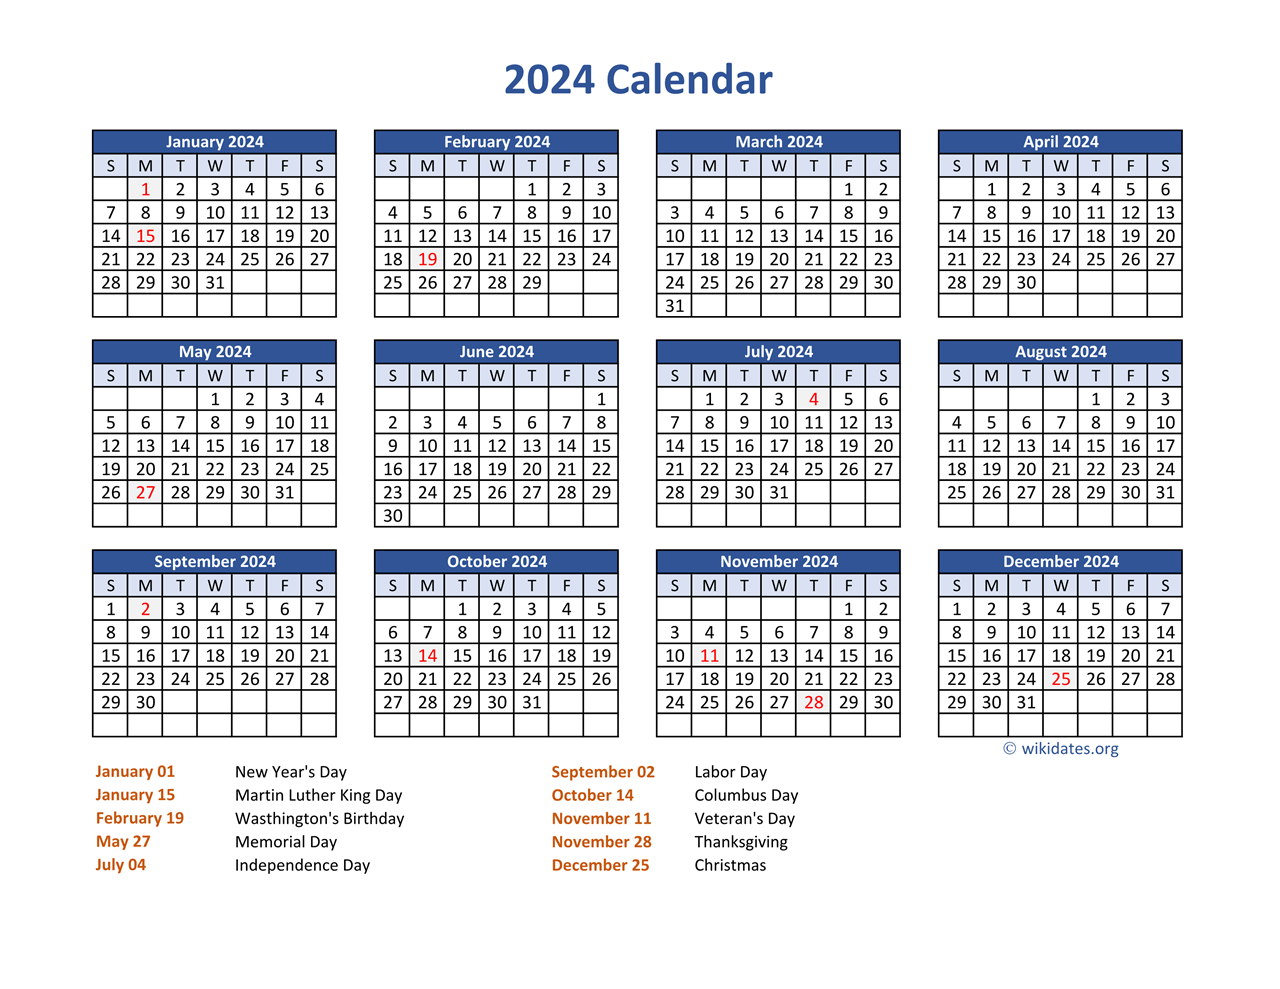 Pdf Calendar 2024 With Federal Holidays | Wikidates for 2024 Calendar Printable With Holidays Free